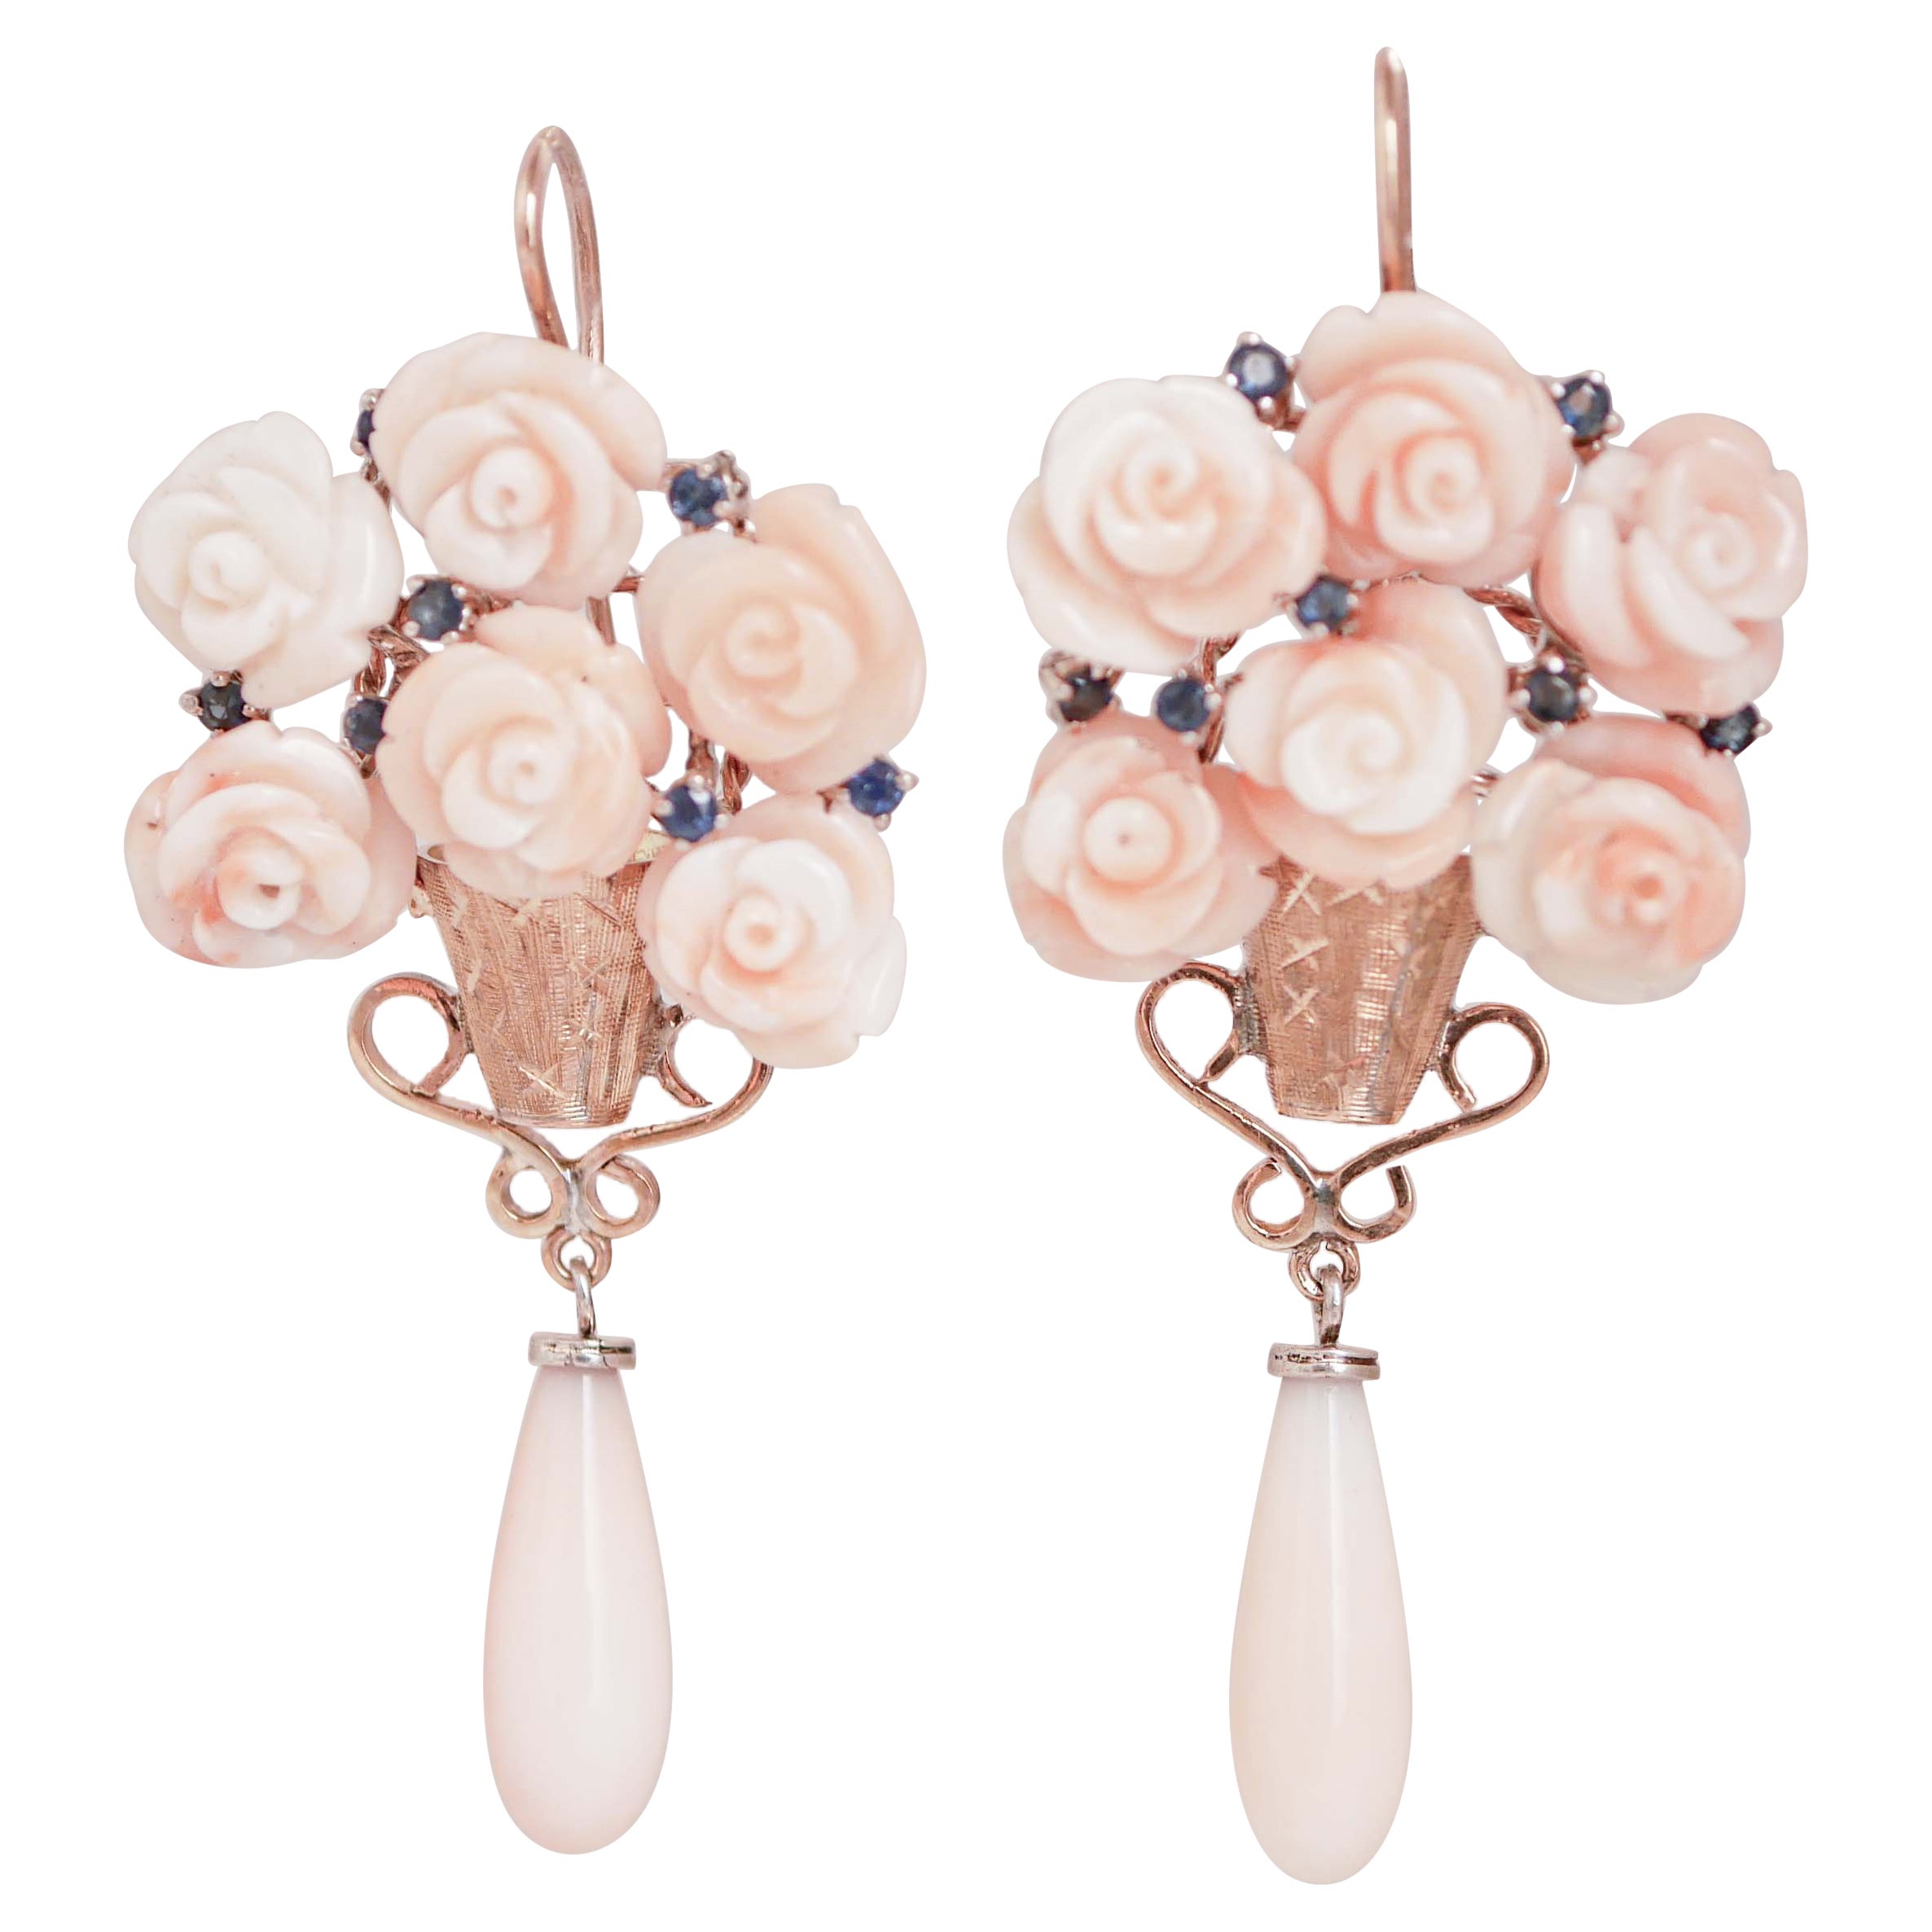 Coral, Sapphires, Rose Gold and Silver Retrò Earrings. For Sale